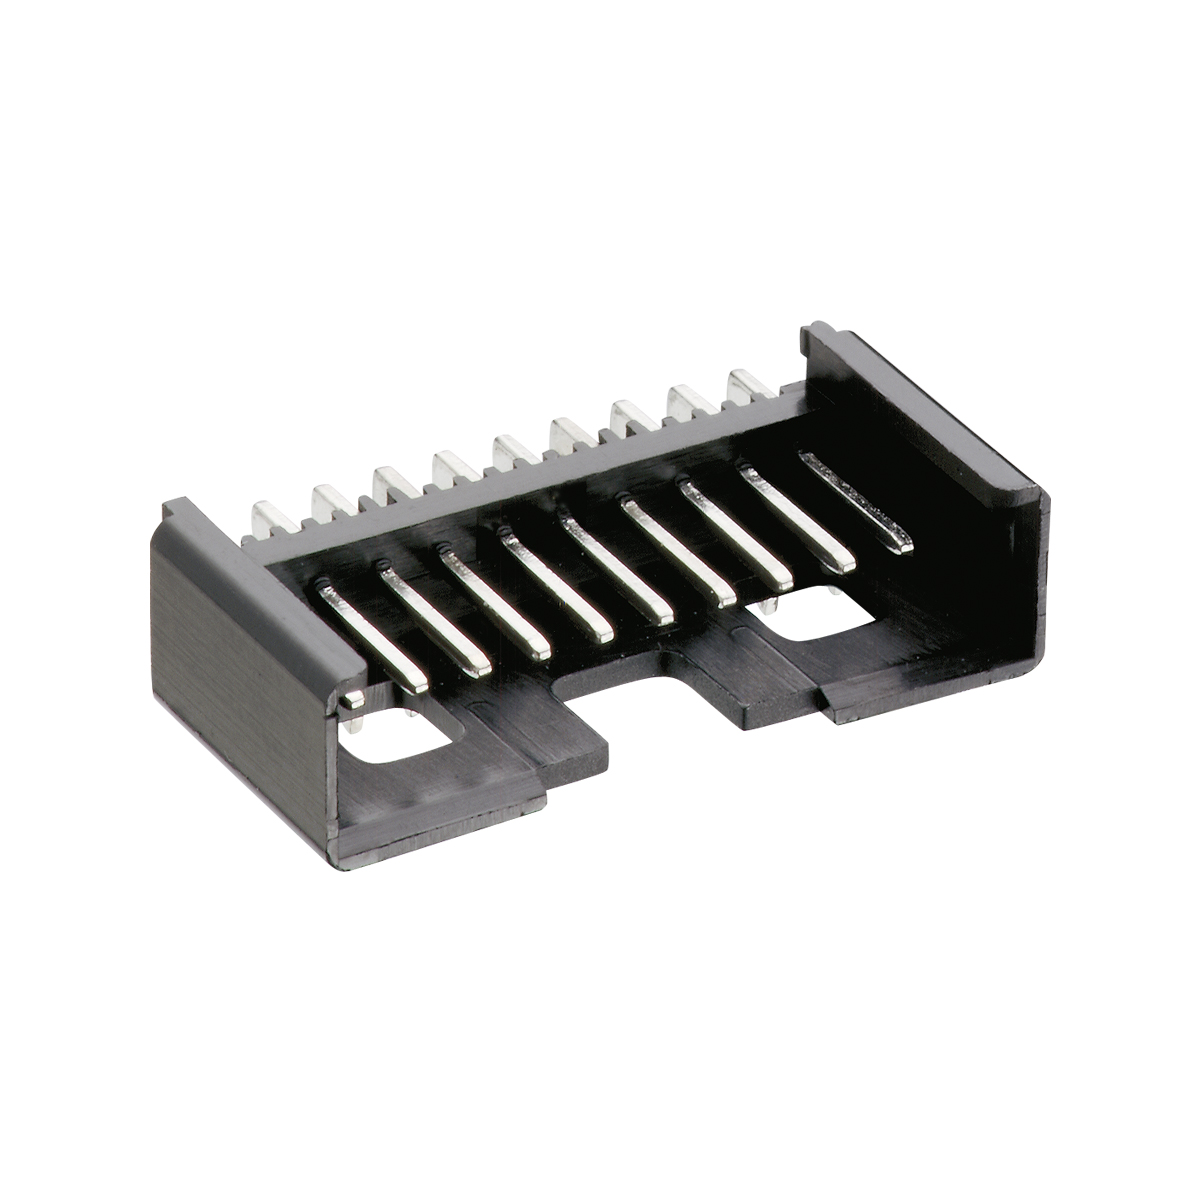 Lumberg: 2,5 MSFW/O (Series 31 | Minimodul™ connectors, pitch 2.5 mm)